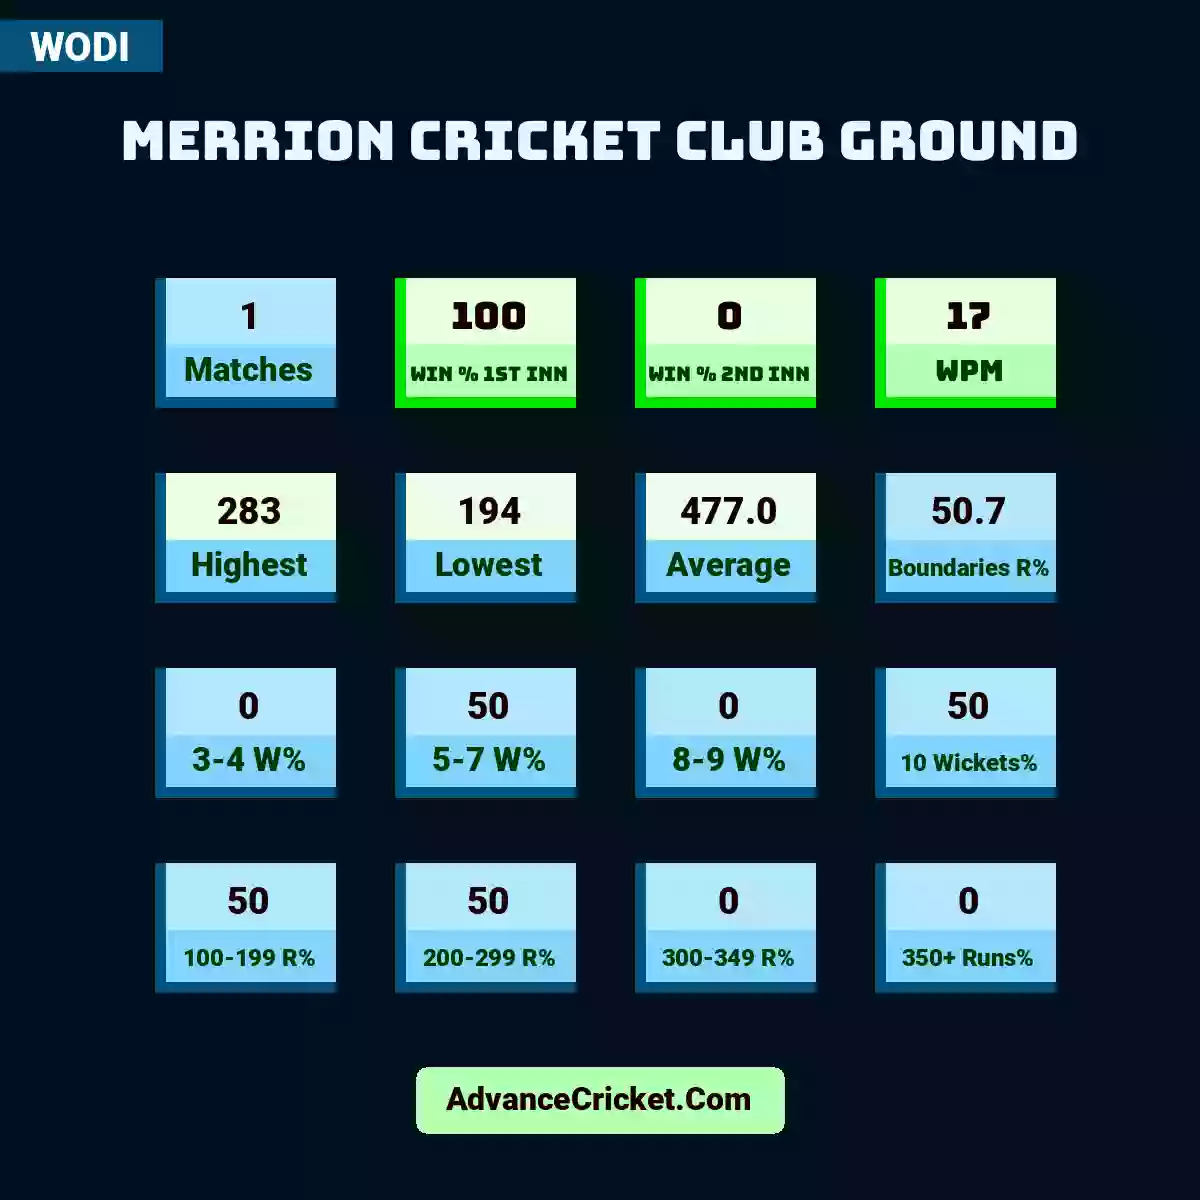 Image showing Merrion Cricket Club Ground with Matches: 1, Win % 1st Inn: 100, Win % 2nd Inn: 0, WPM: 17, Highest: 283, Lowest: 194, Average: 477.0, Boundaries R%: 50.7, 3-4 W%: 0, 5-7 W%: 50, 8-9 W%: 0, 10 Wickets%: 50, 100-199 R%: 50, 200-299 R%: 50, 300-349 R%: 0, 350+ Runs%: 0.